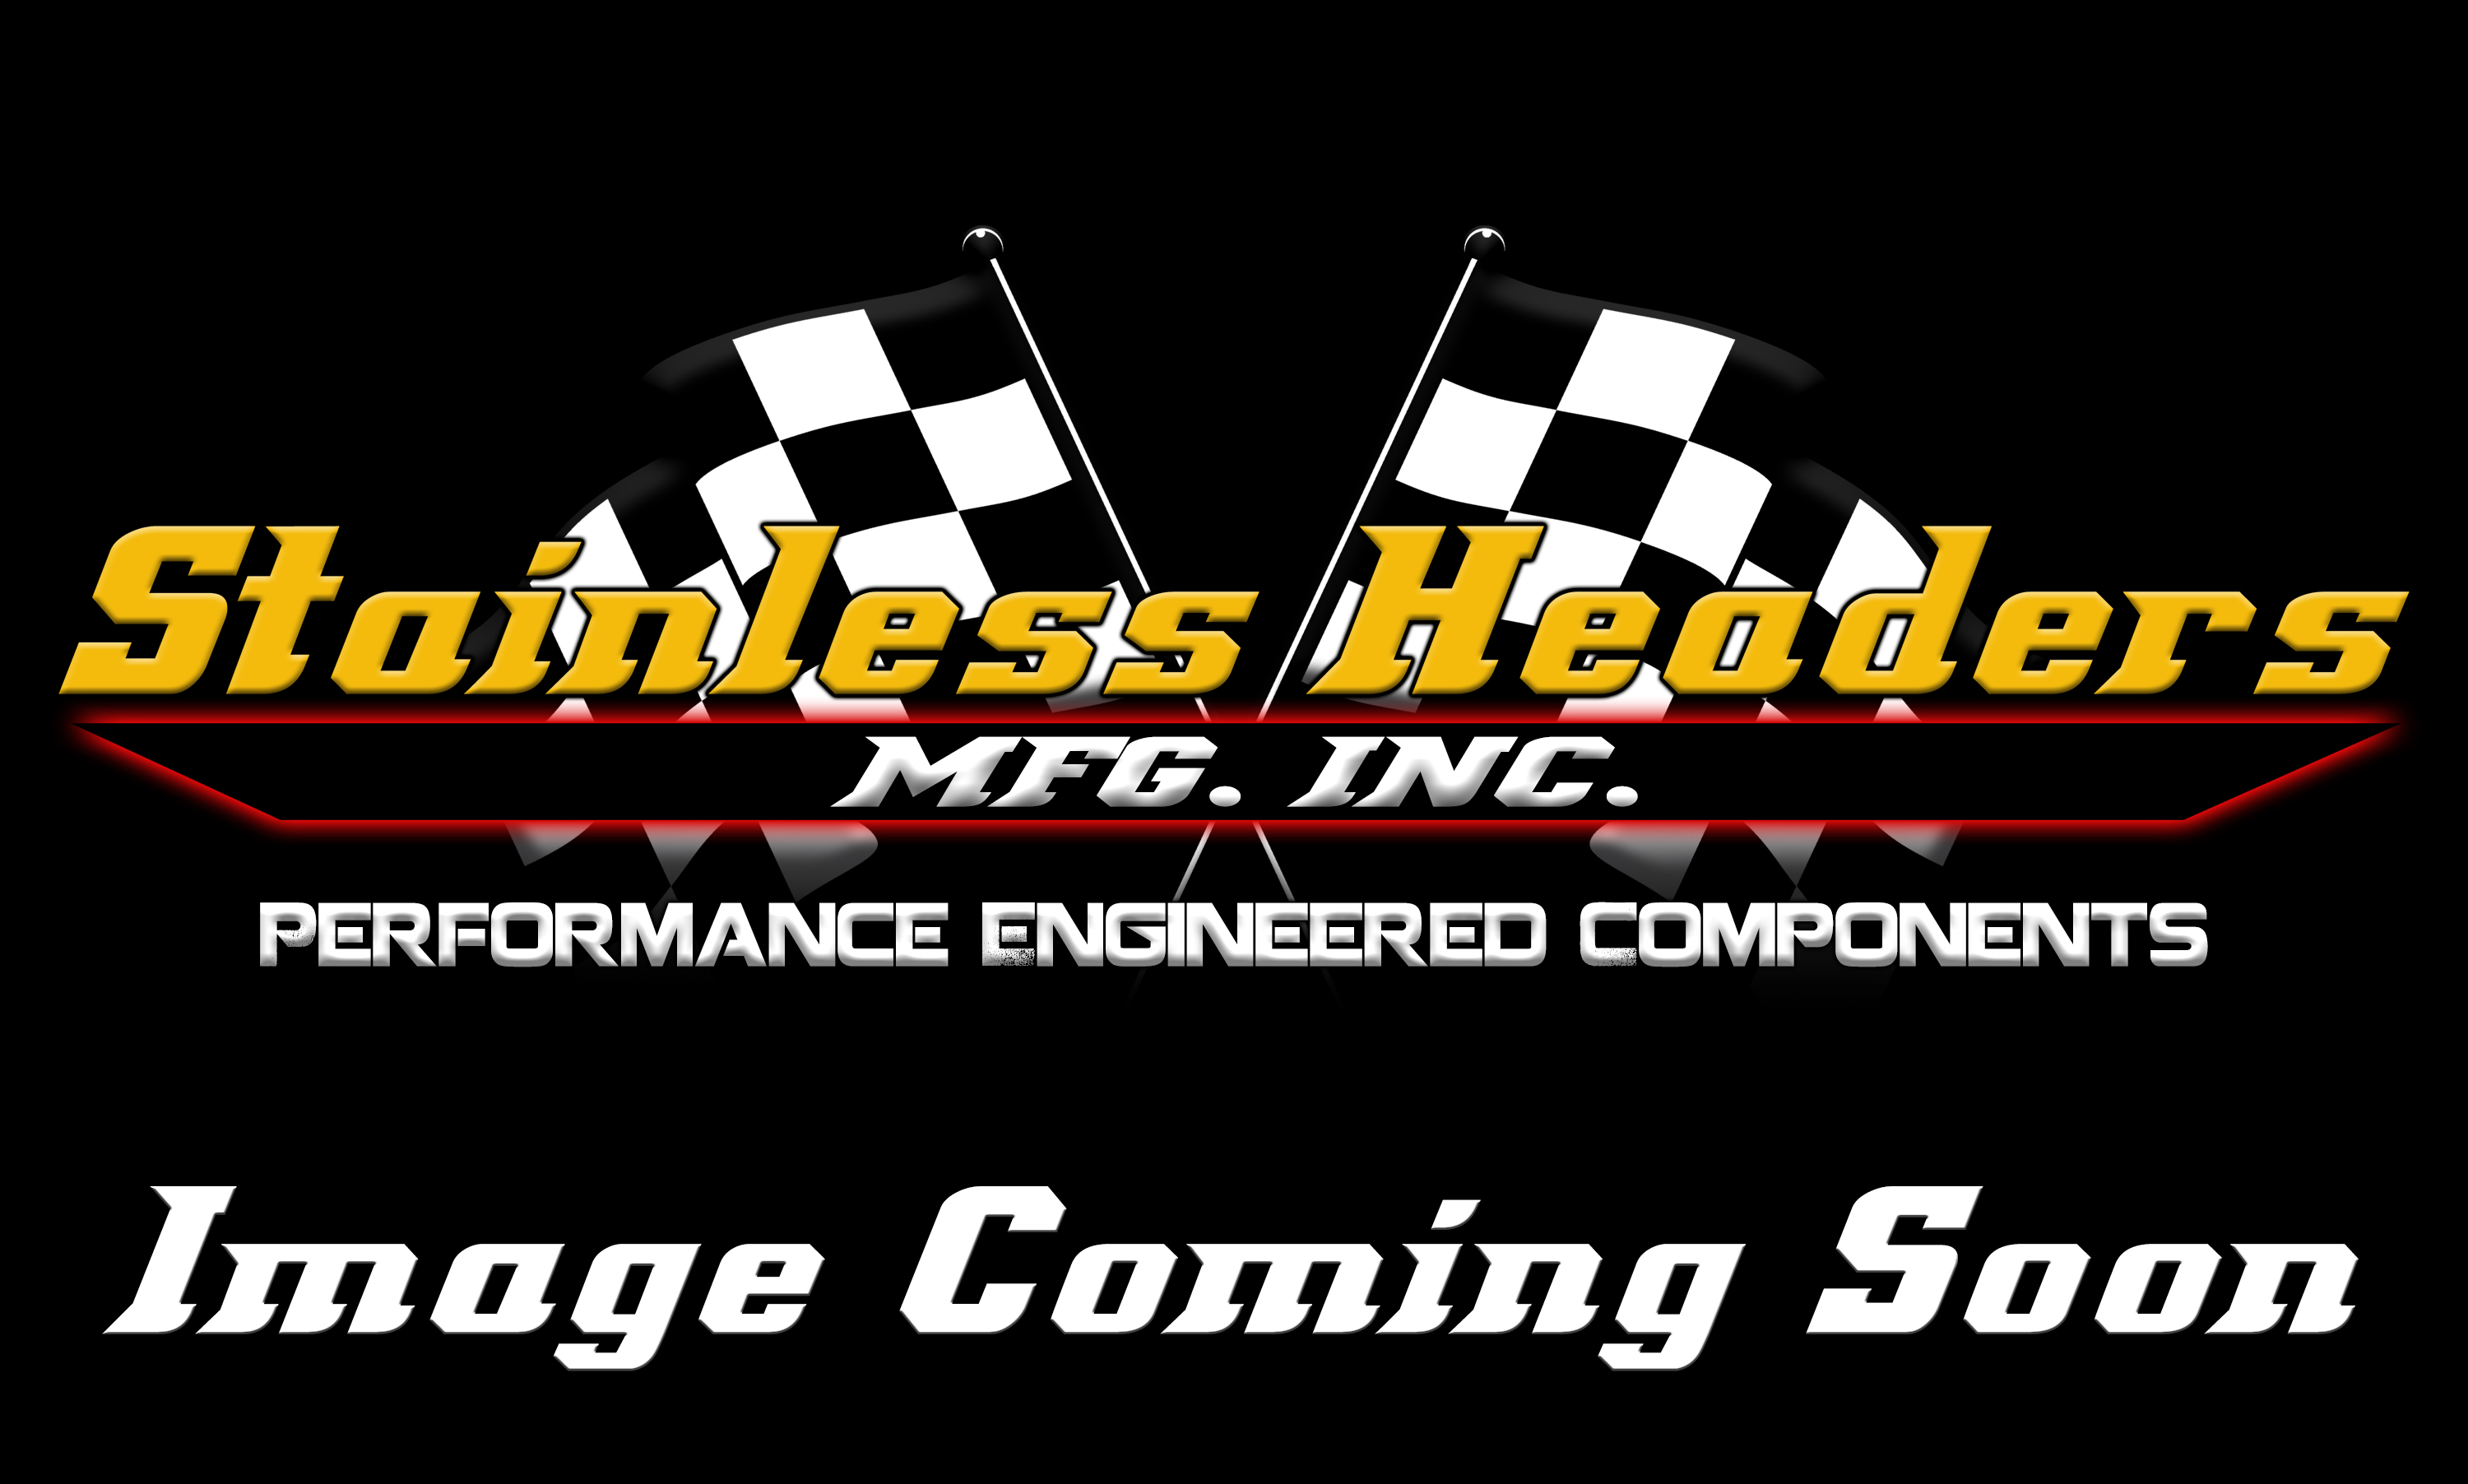 CompTurbo Technologies - CTR4202R-7290 Mid Frame Air-Cooled 1.0  Turbocharger (1250 HP)